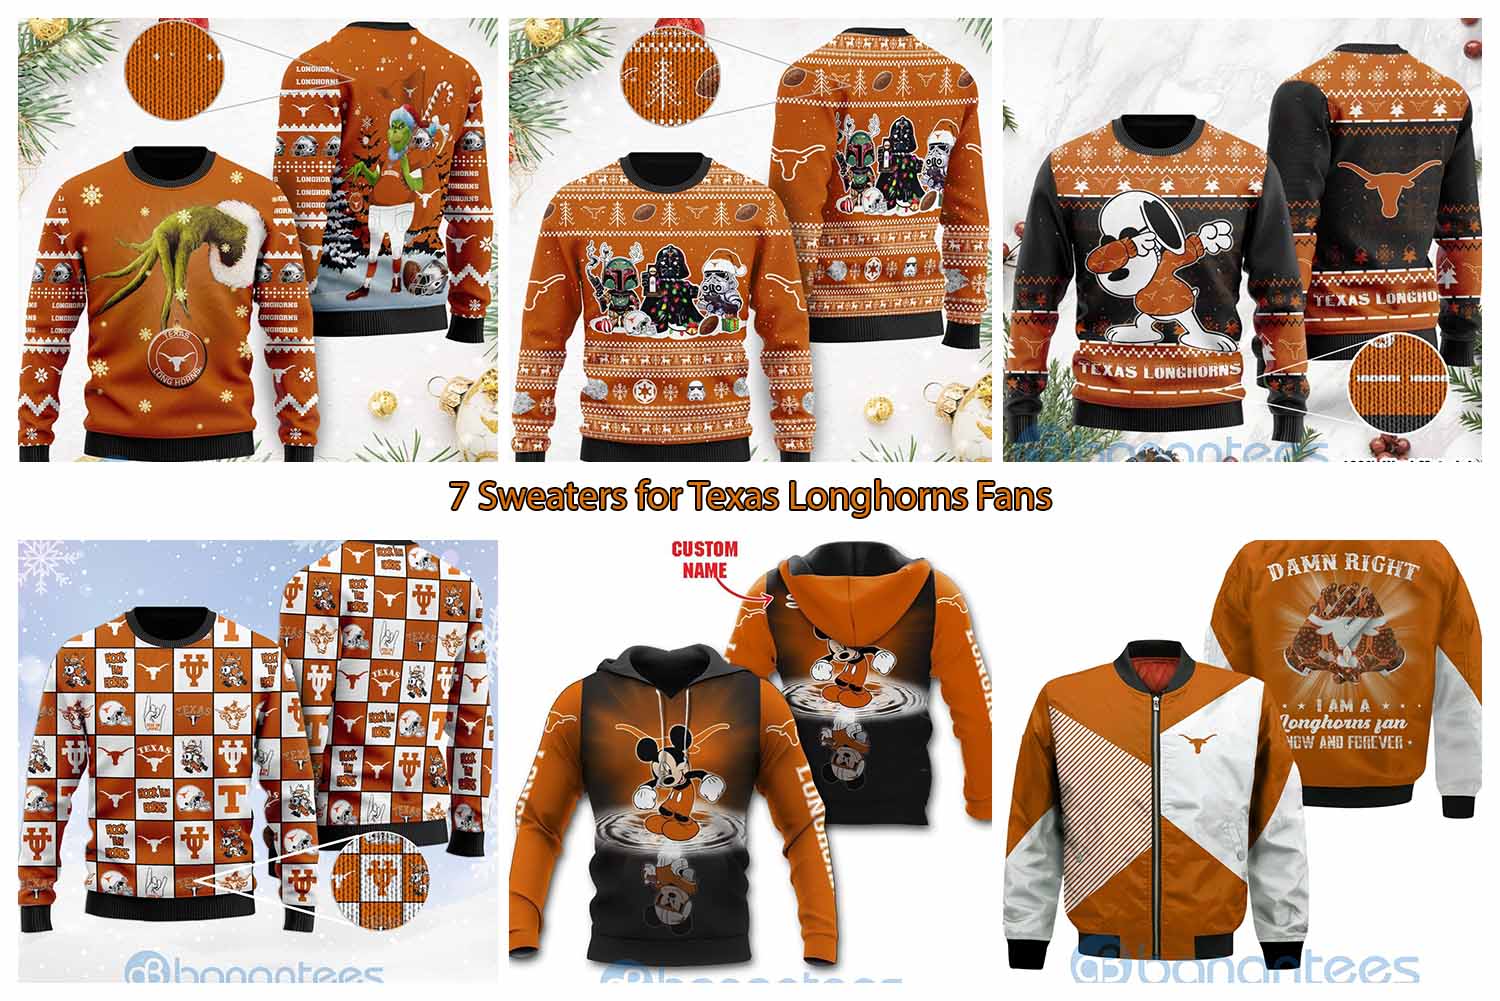 7 Sweaters for Texas Longhorns Fans